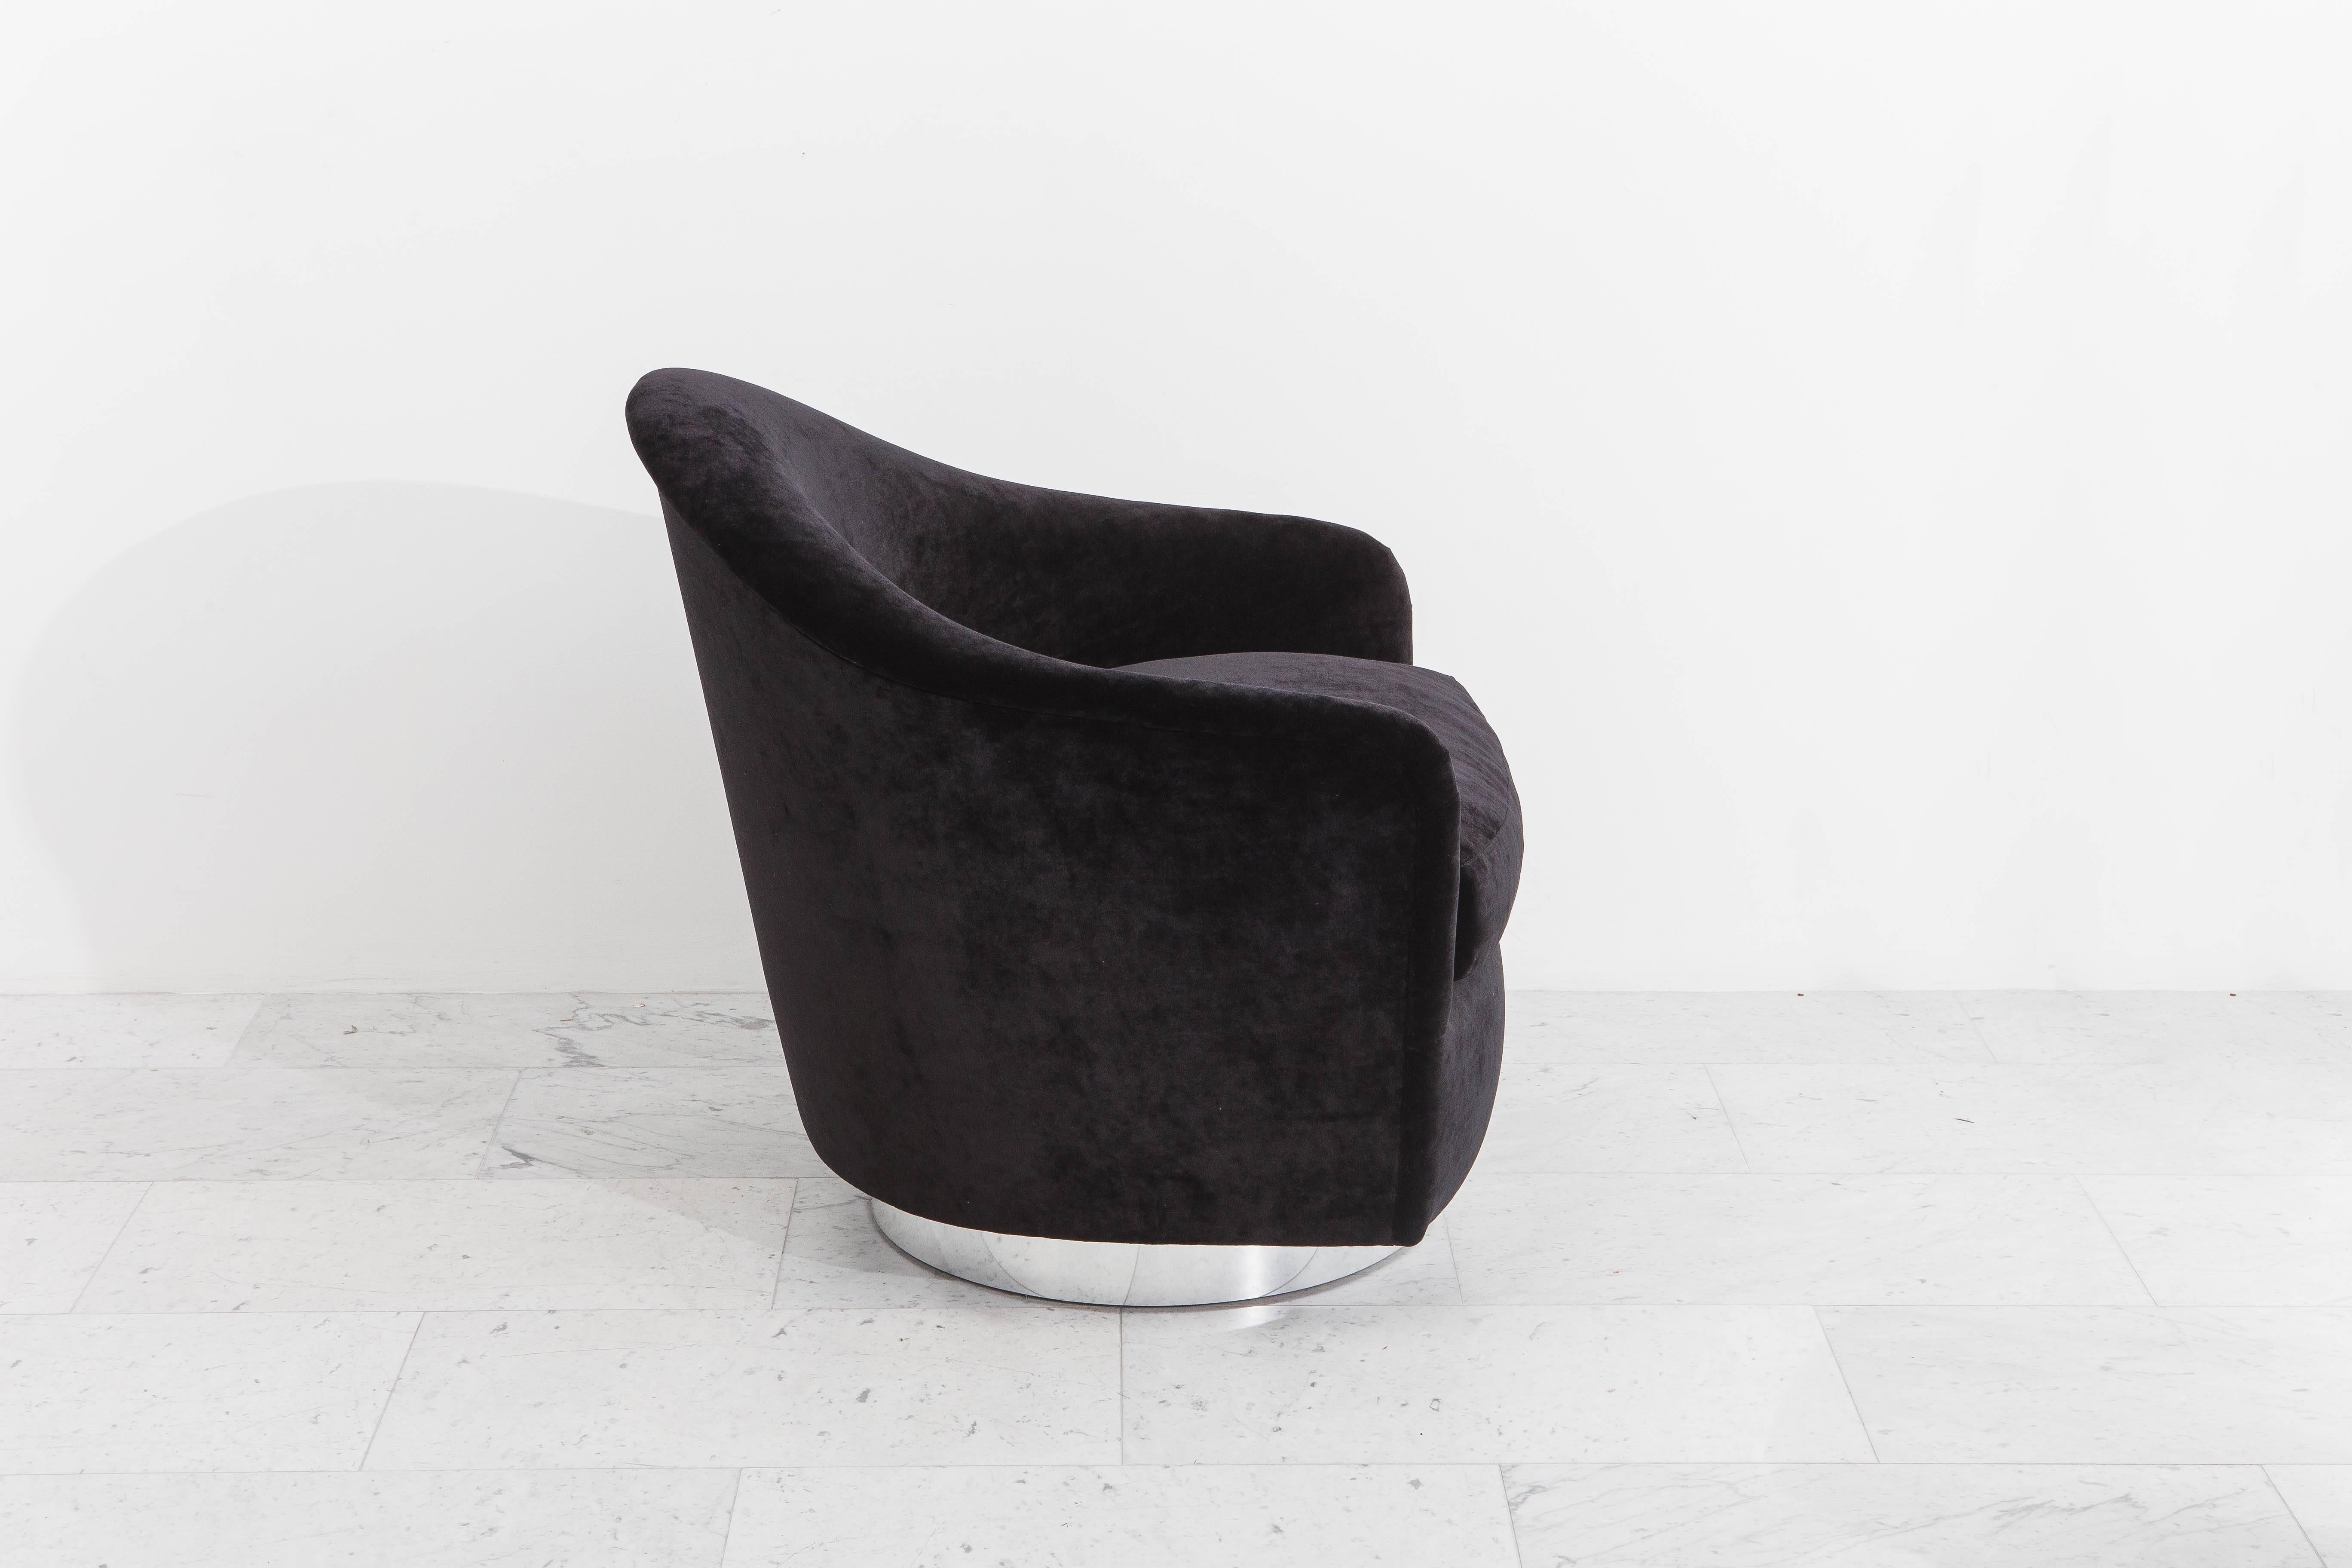 A beautiful single swivel chair designed by Milo Baughman with a circular chrome base and matching ottoman. The combination of high back and foot rest offers an ideal seating option for a single comfortable accent chair. Newly upholstered in a